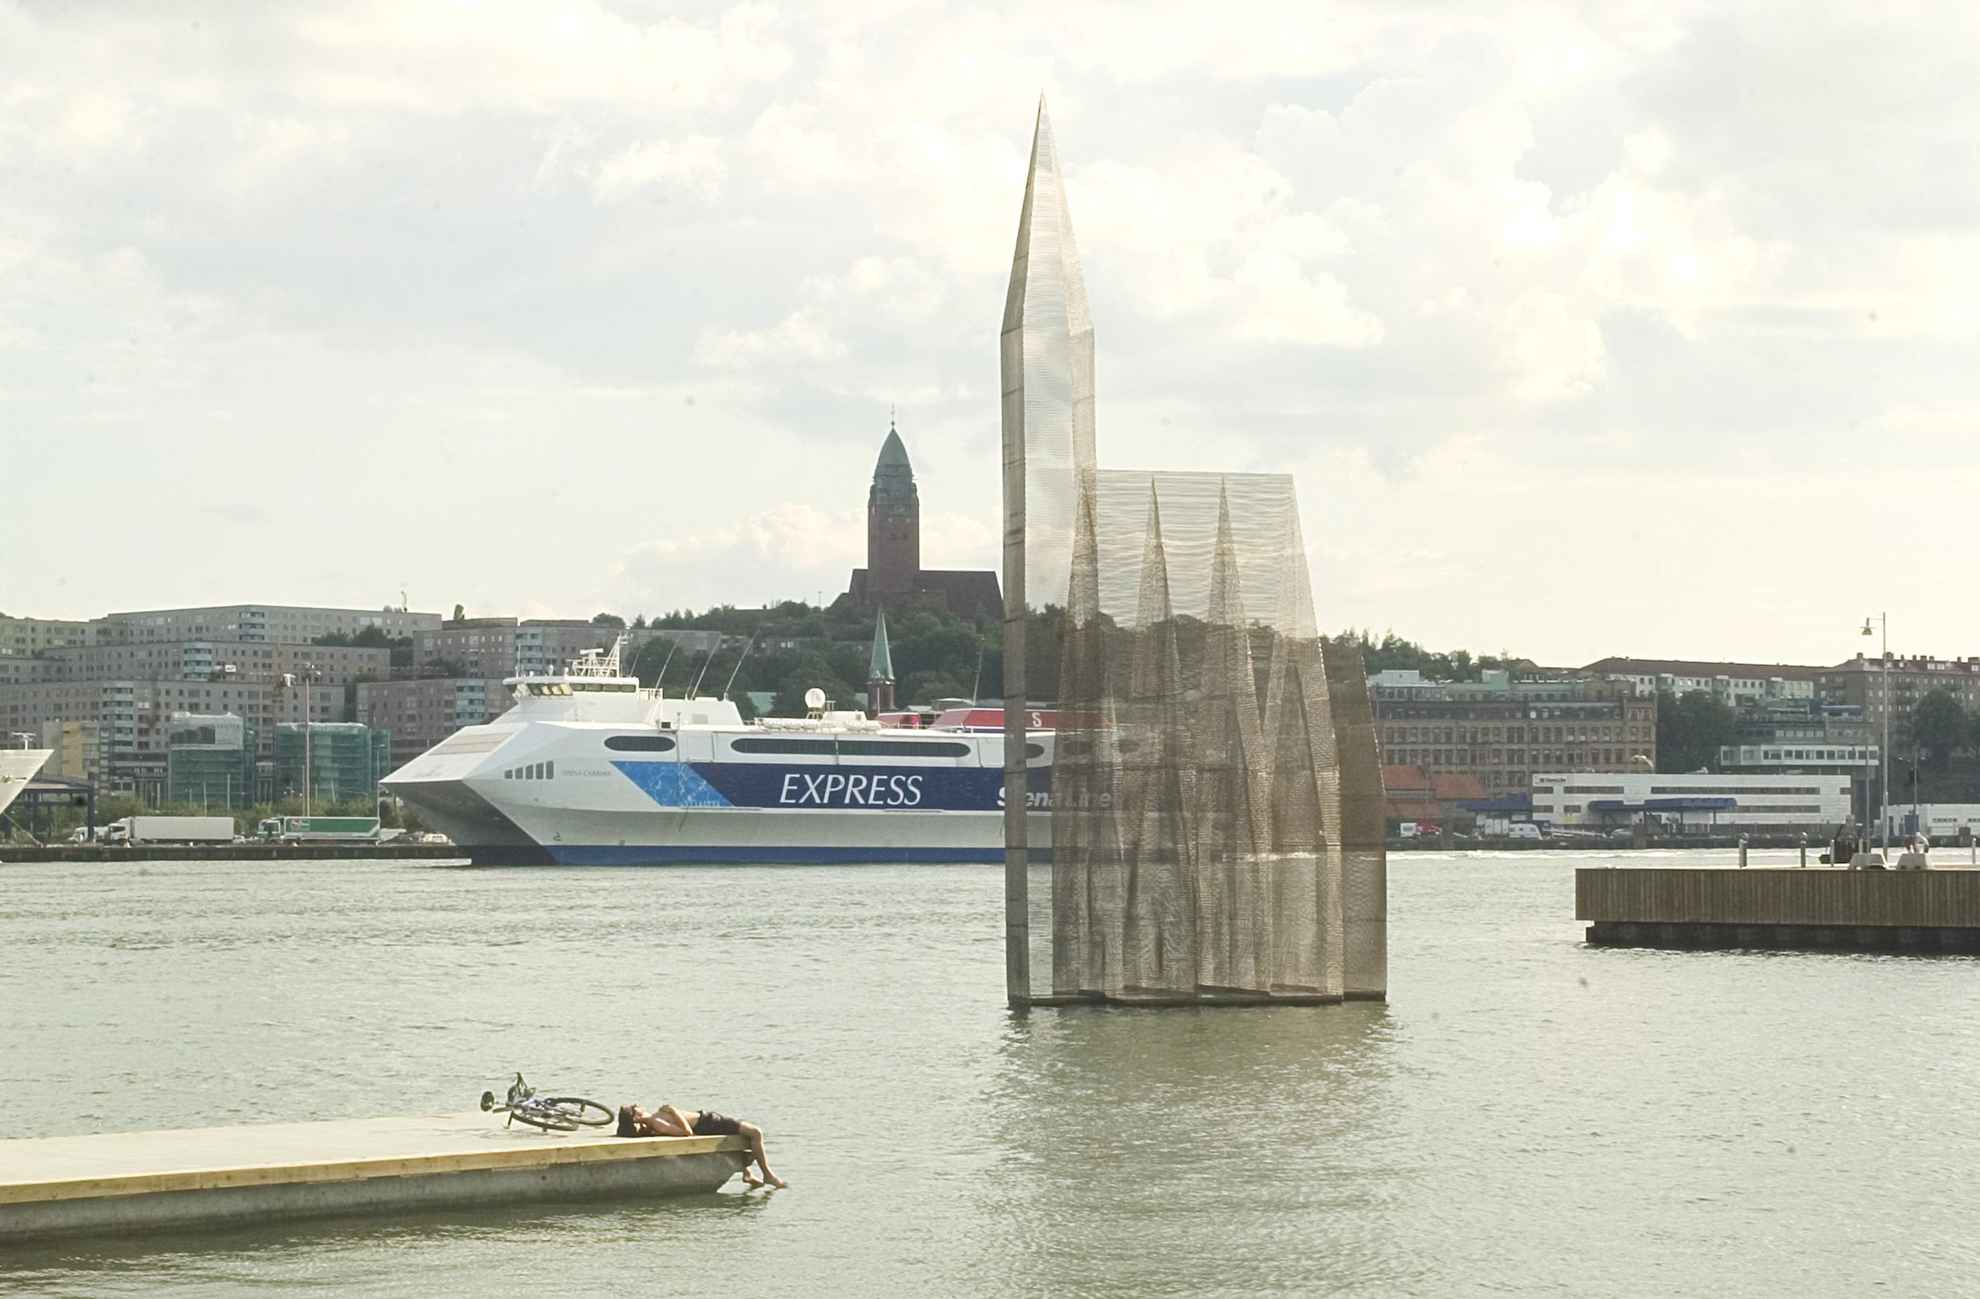 A transparent church-like sculpture called ‘Temple of Doubt and Hope’ floats on the water in in Gothenburg harbour basin. To the left a person is lying on a jetty next to a bike. In the background you see a ferryboat.